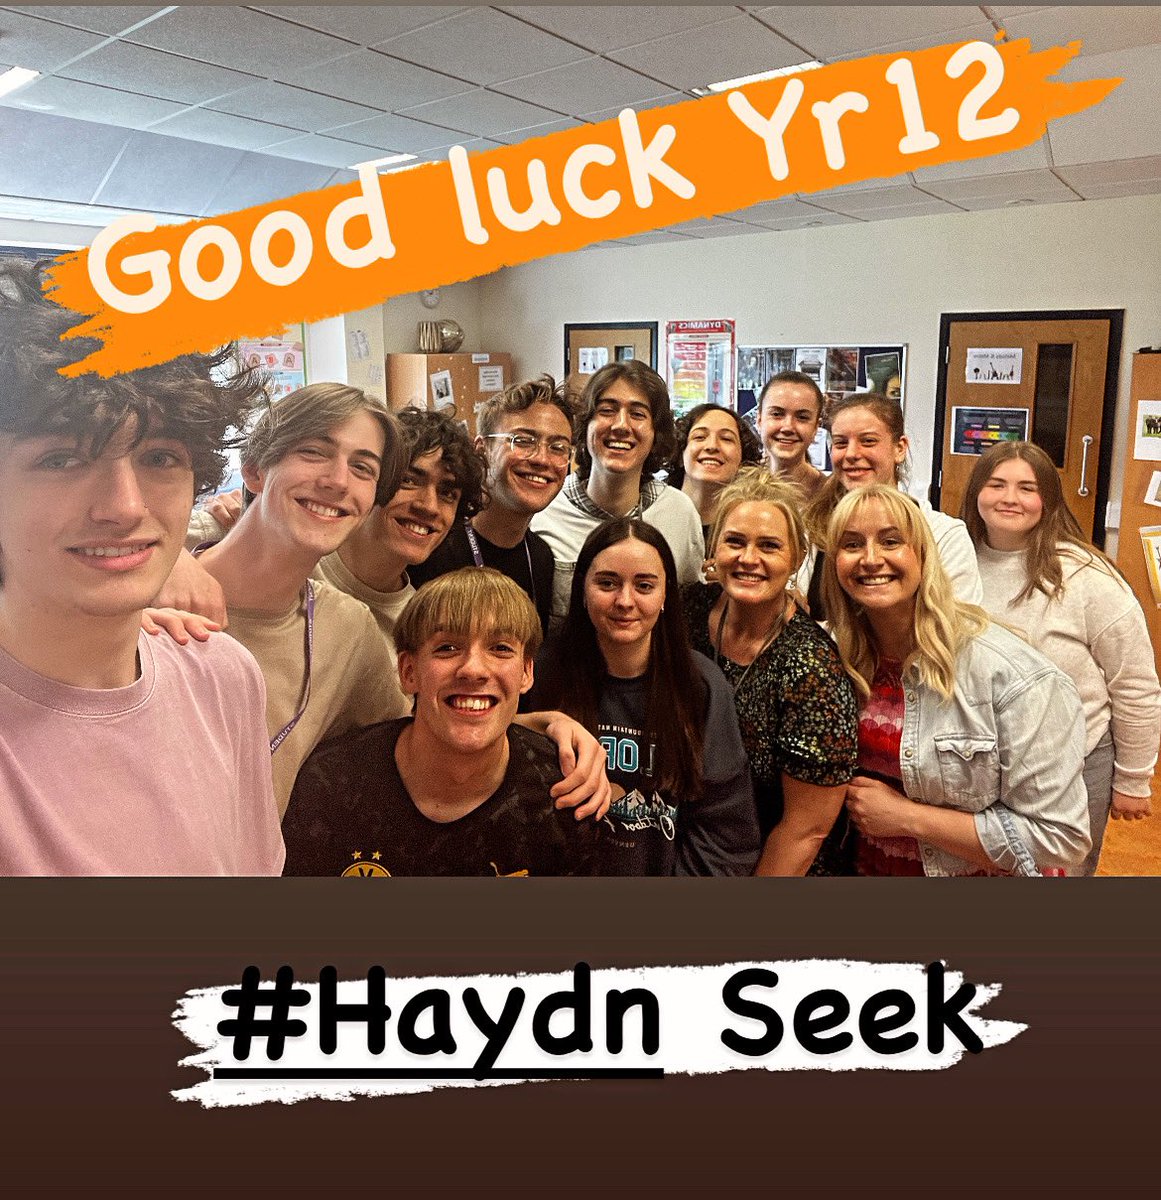 Best of luck to our @whs_cardiff Year 12 music students with their exams!